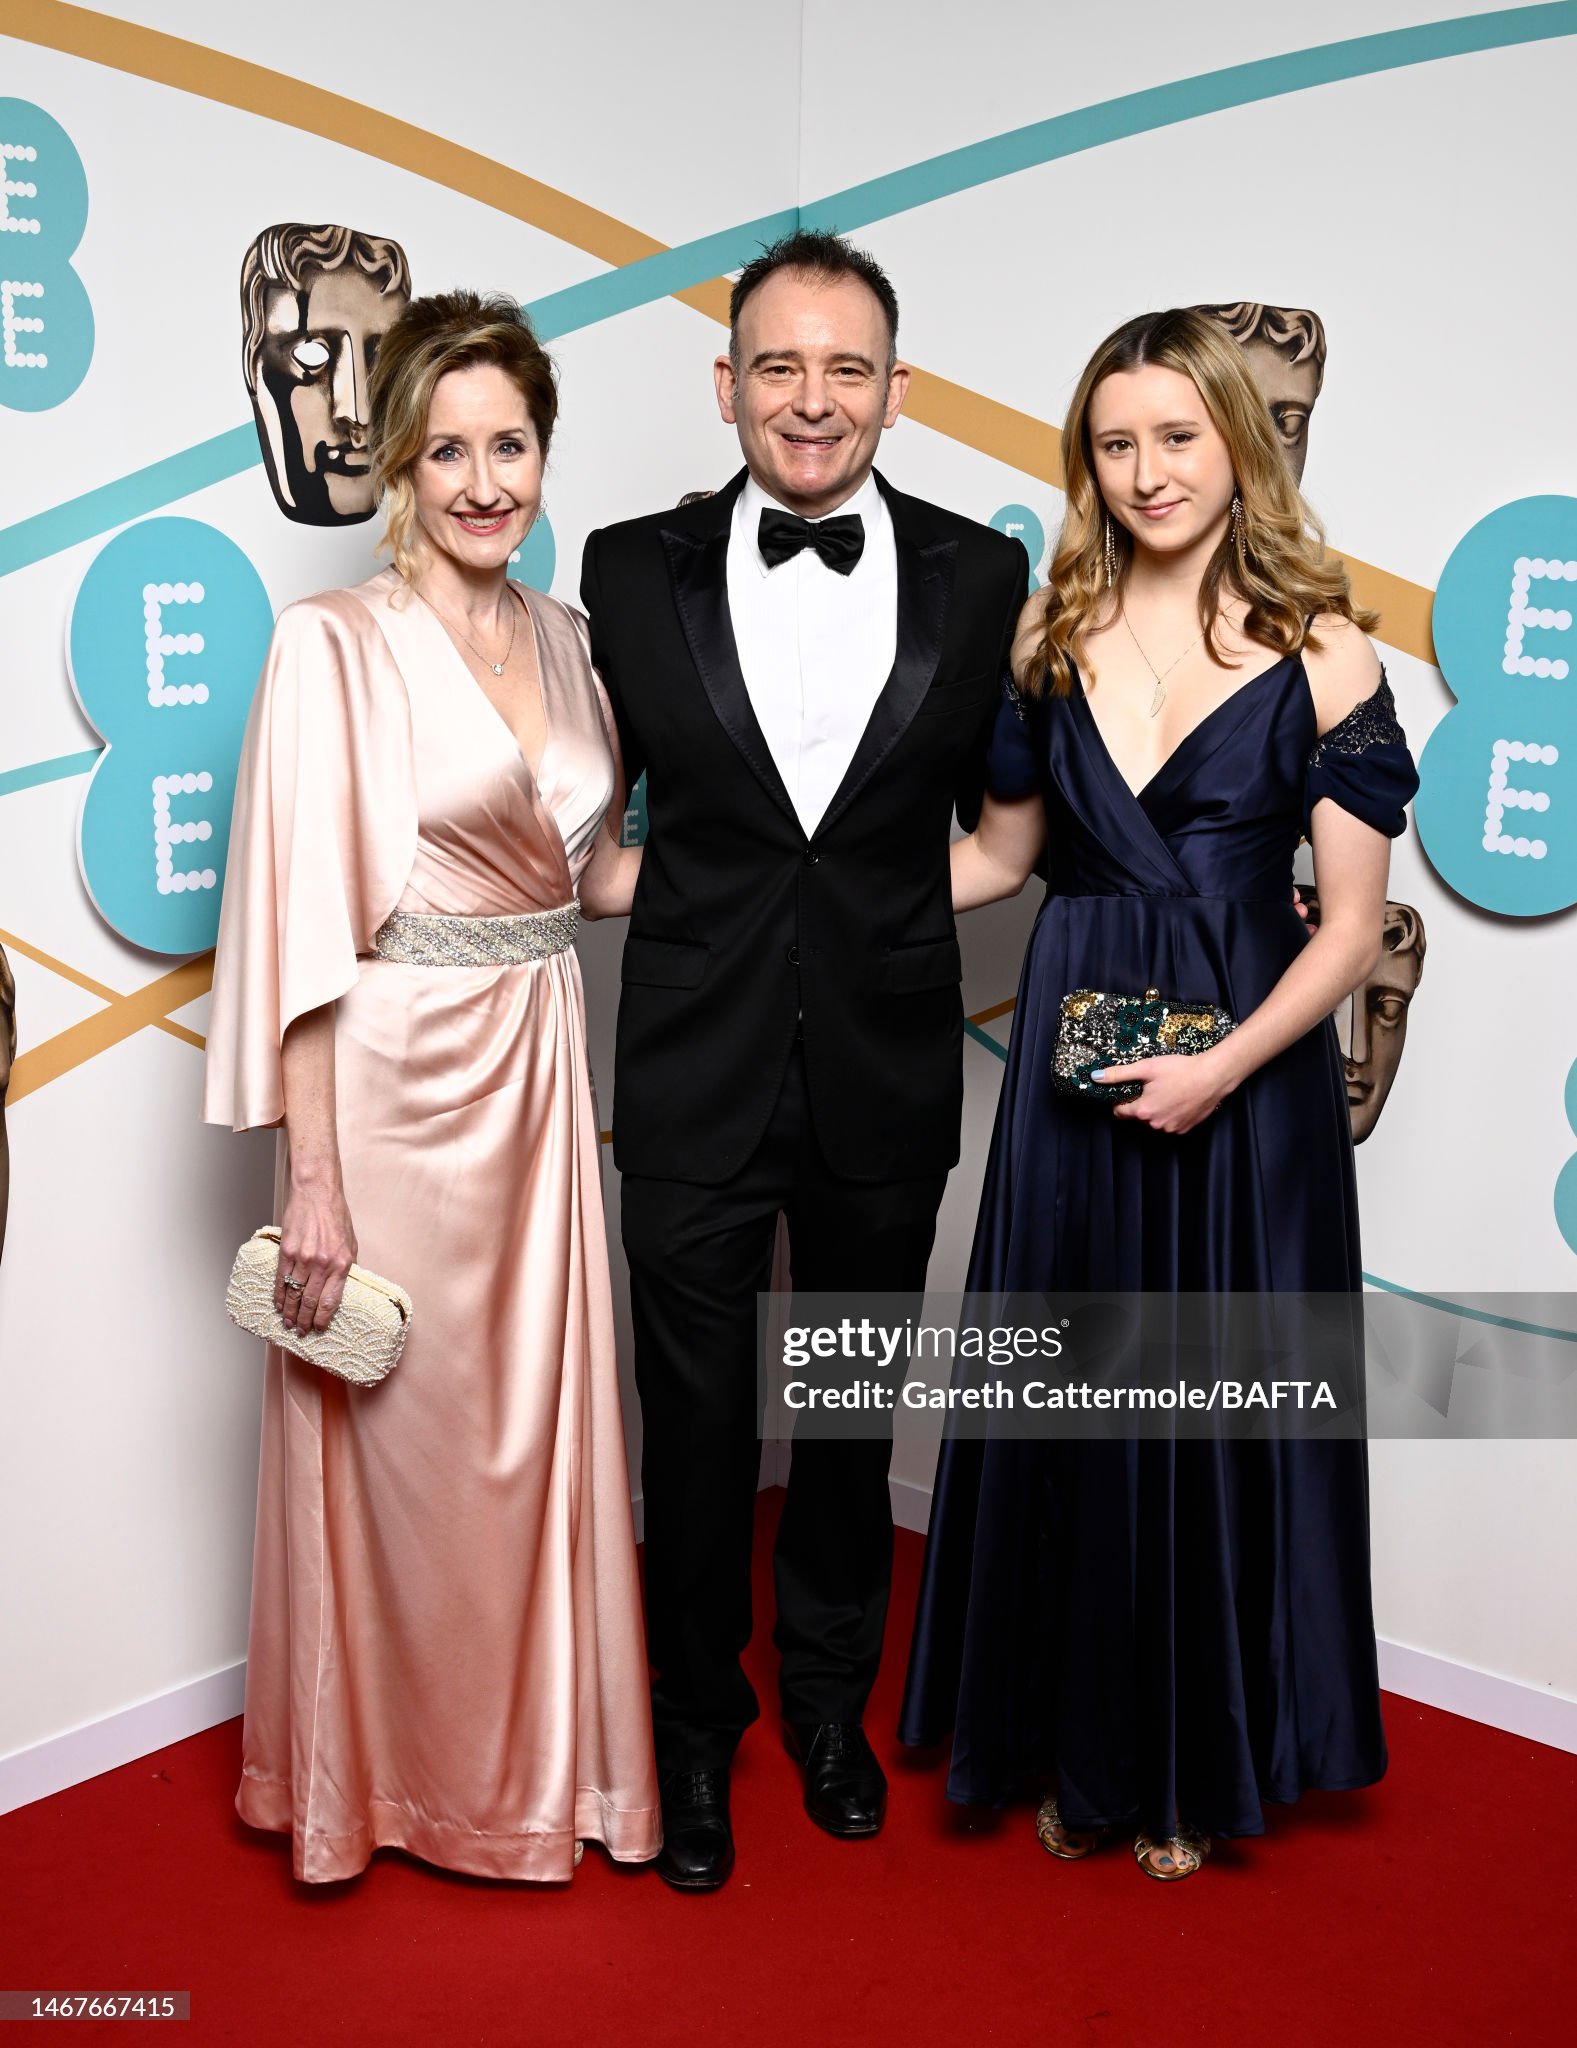 lauren-ward-director-matthew-warchus-and-a-guest-attend-the-ee-bafta-film-awards-2023-at-the.jpg